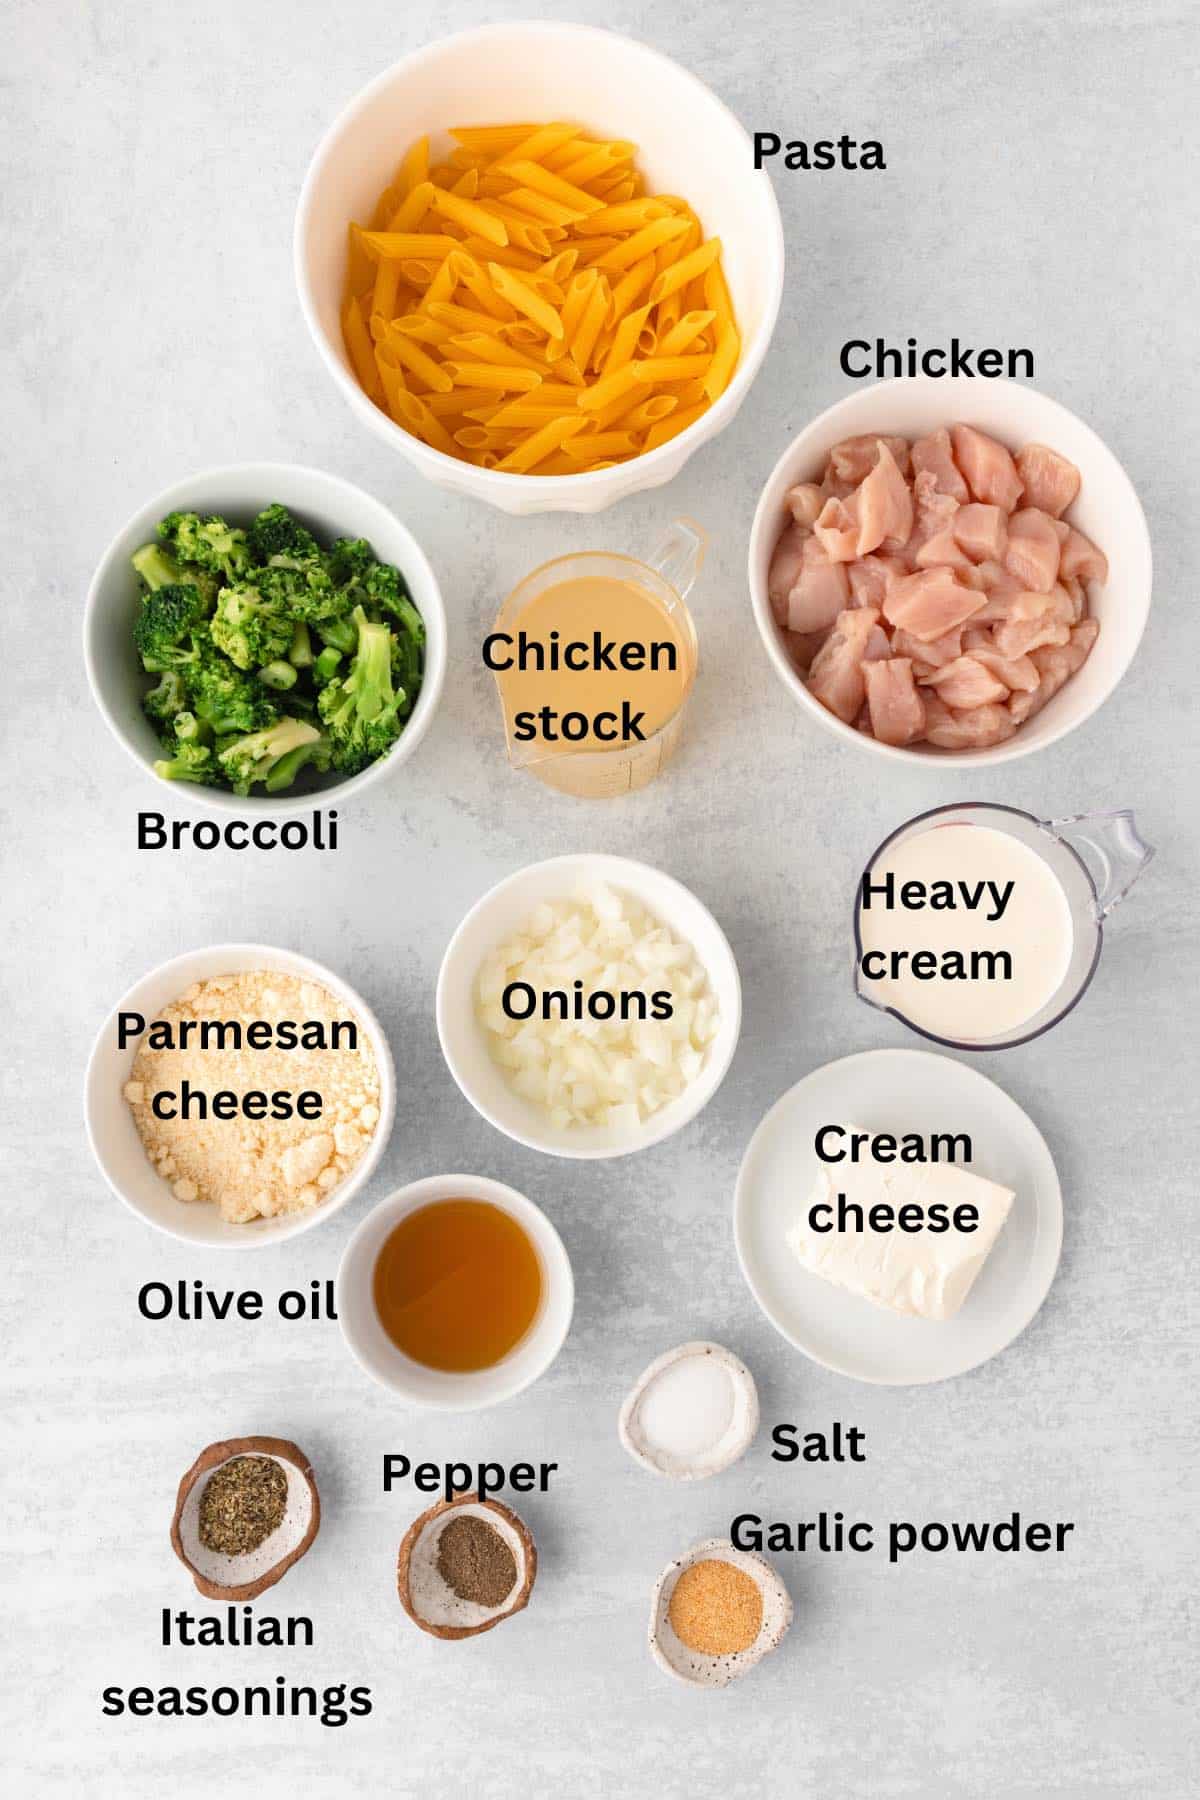 Ingredients for Chicken Broccoli Pasta includes chicken stock, broccoli, heavy cream, and Parmesan cheese.